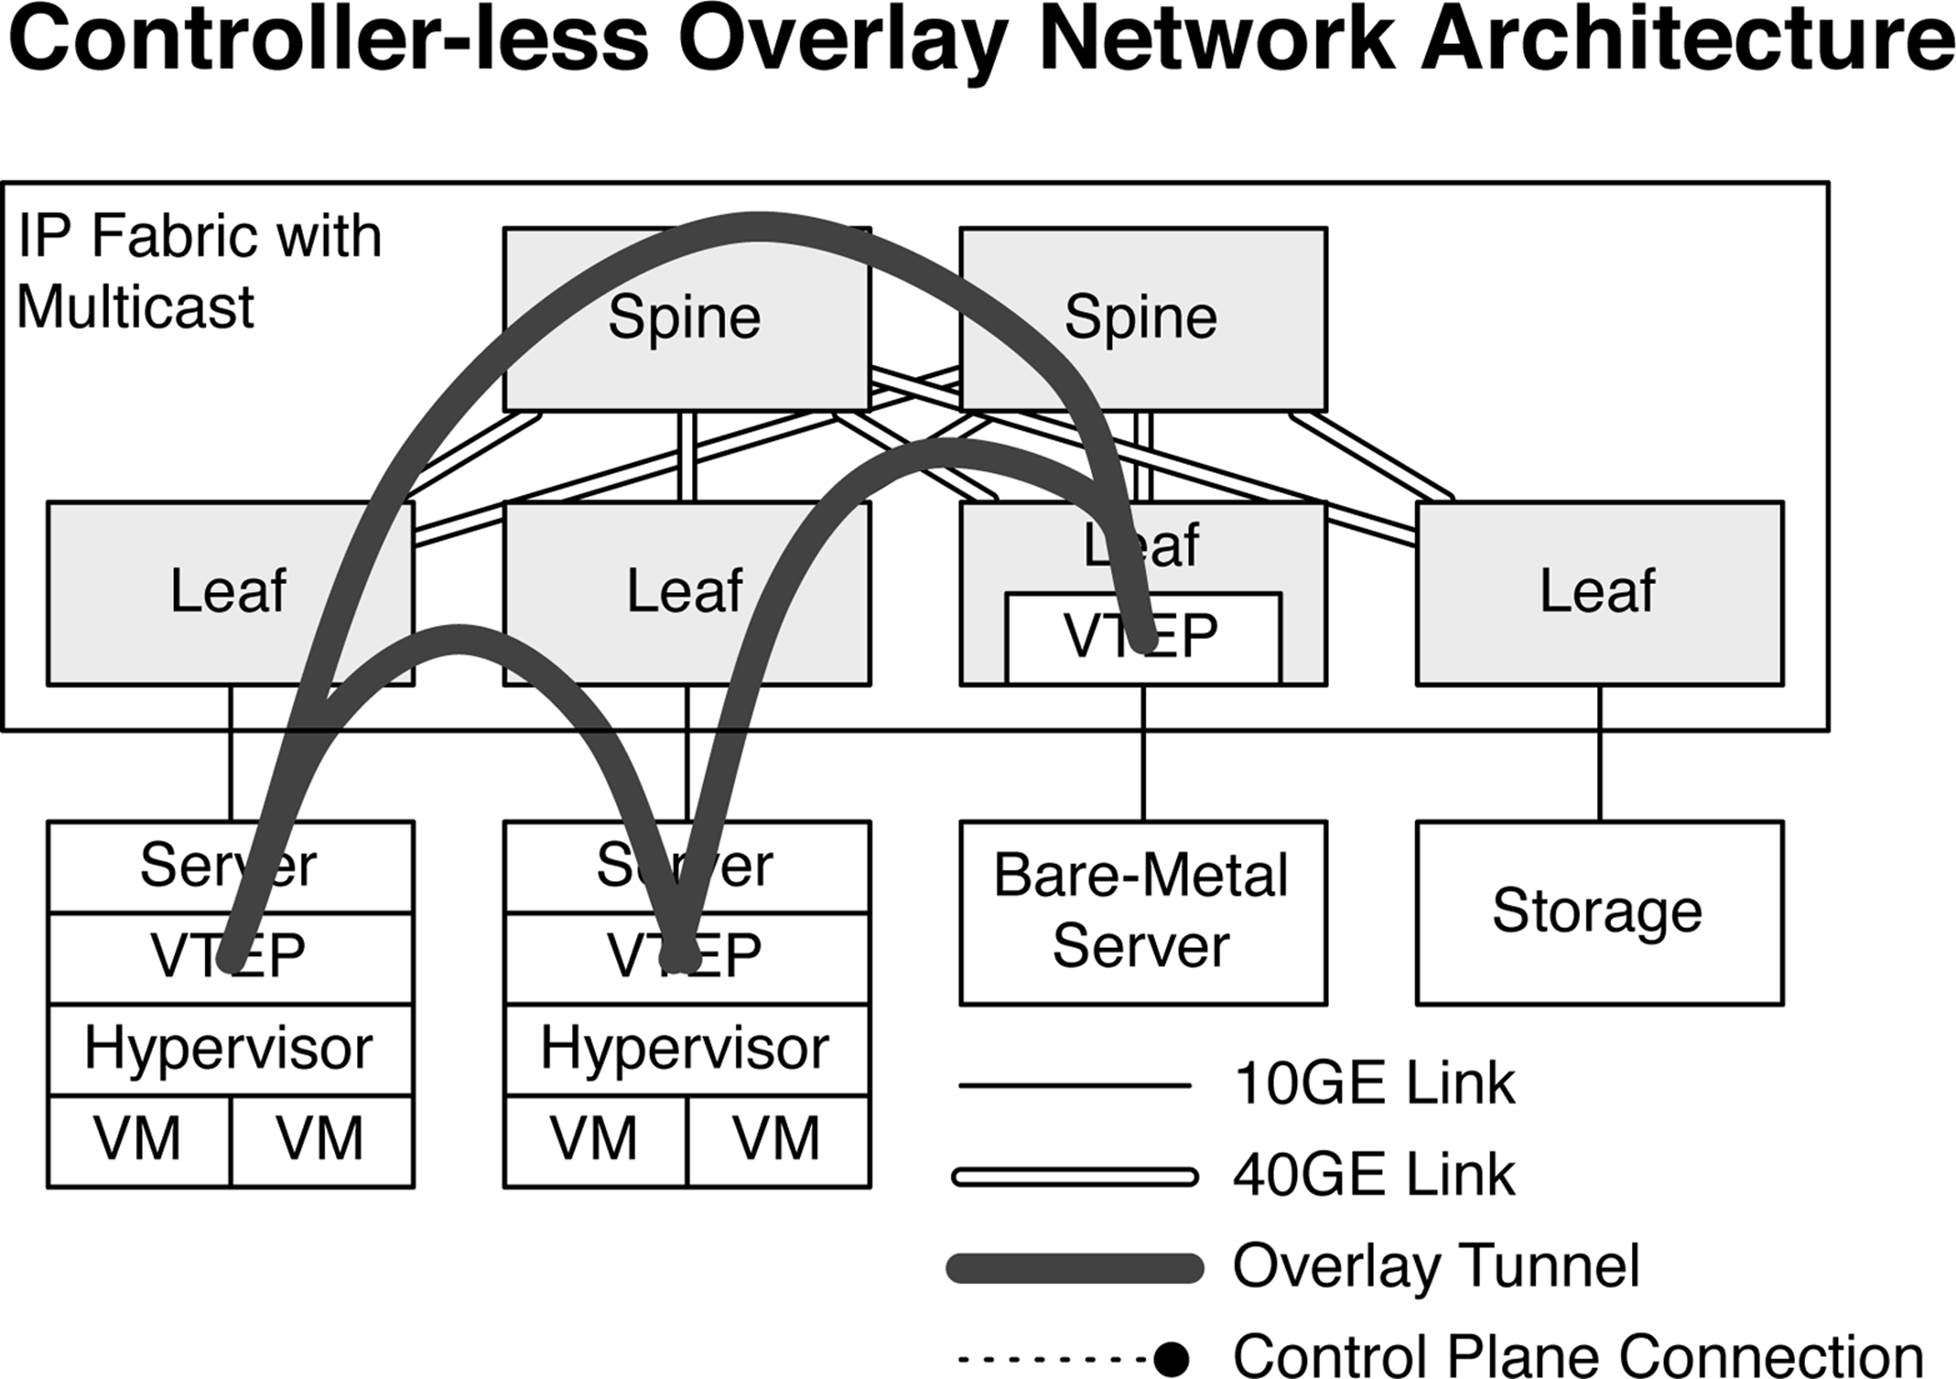 Controller-less overlay network architecture with multicast IP Fabric